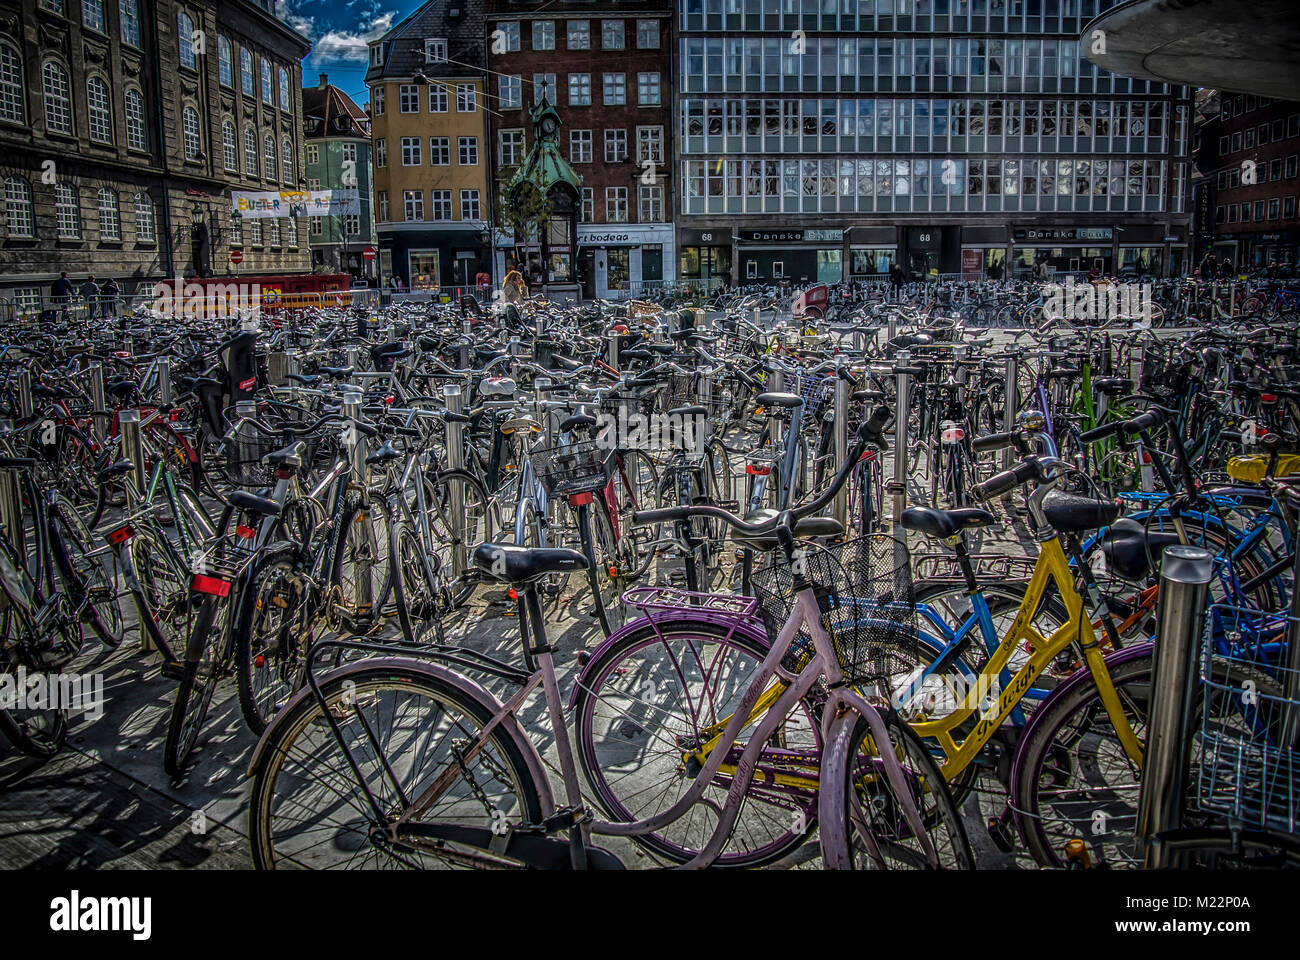 Copenhagen, Denmark – September 27th 2014: a bicycle parking lot in Copenhagen with hundreds of bicycles Stock Photo